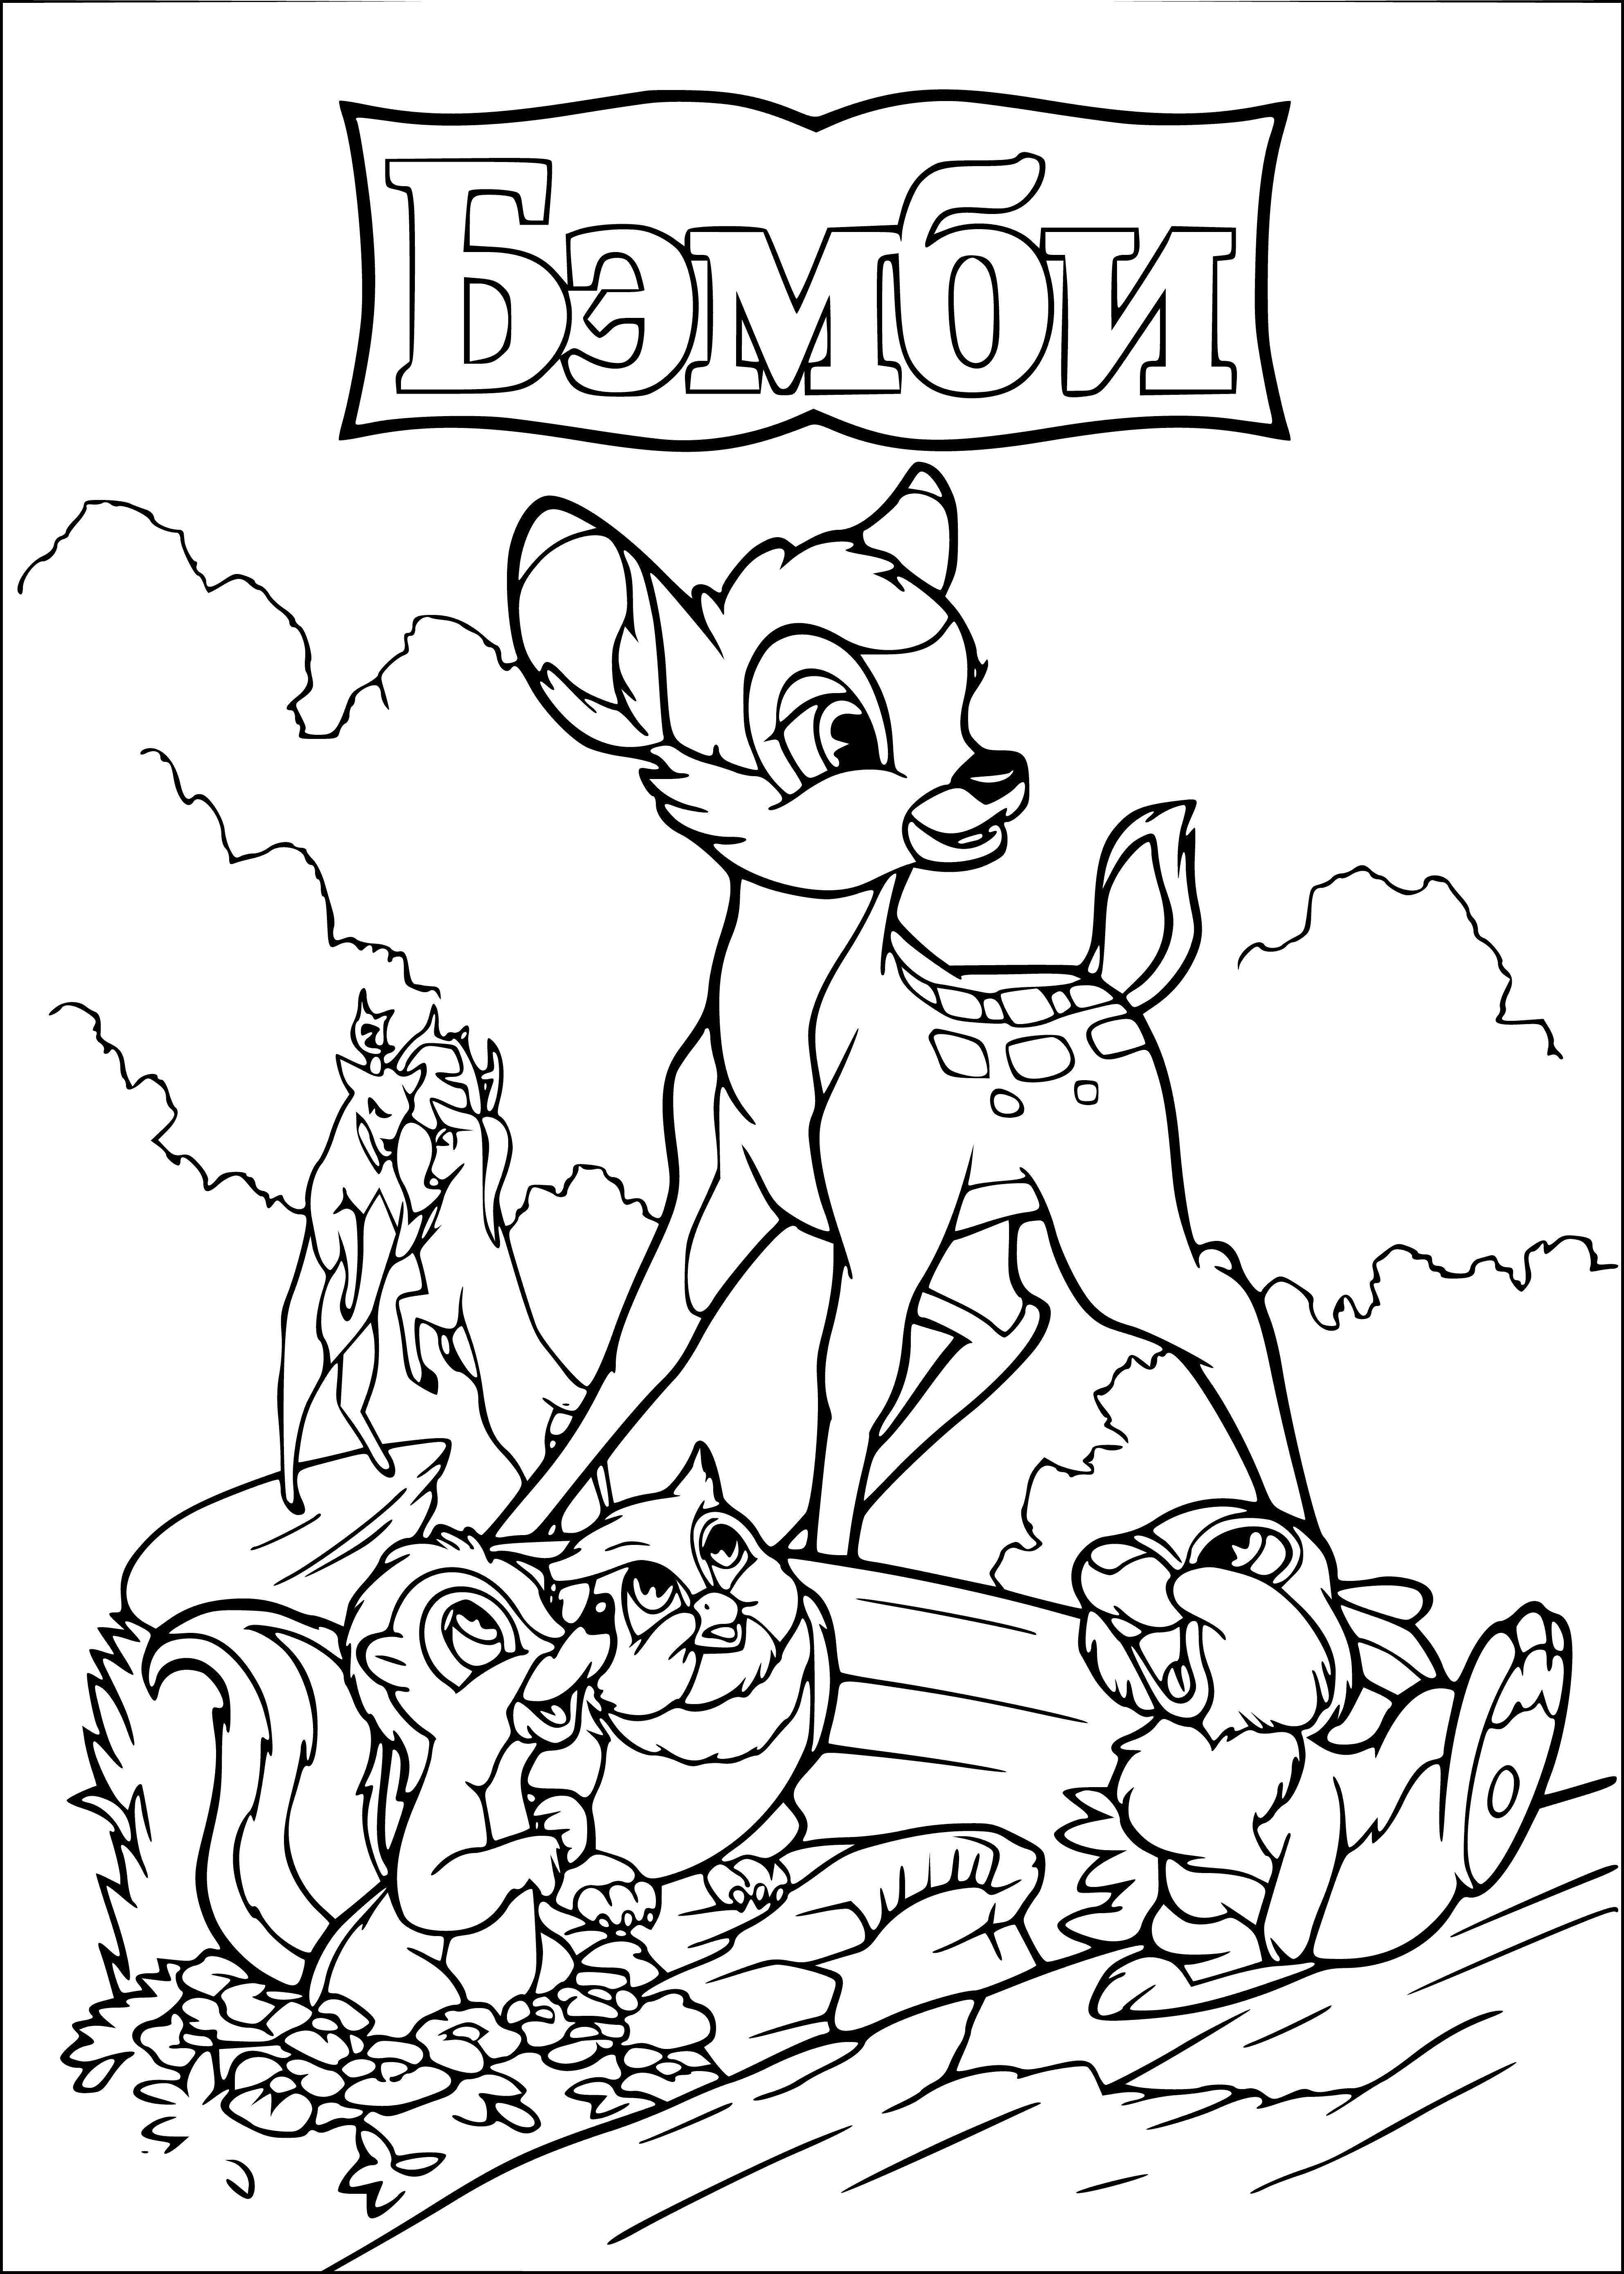 coloring page: Fawn in clearing in a green forest w/ trees, bushes; brown w/ white spots, big brown eyes, short tail, standing on four legs, blue sky.